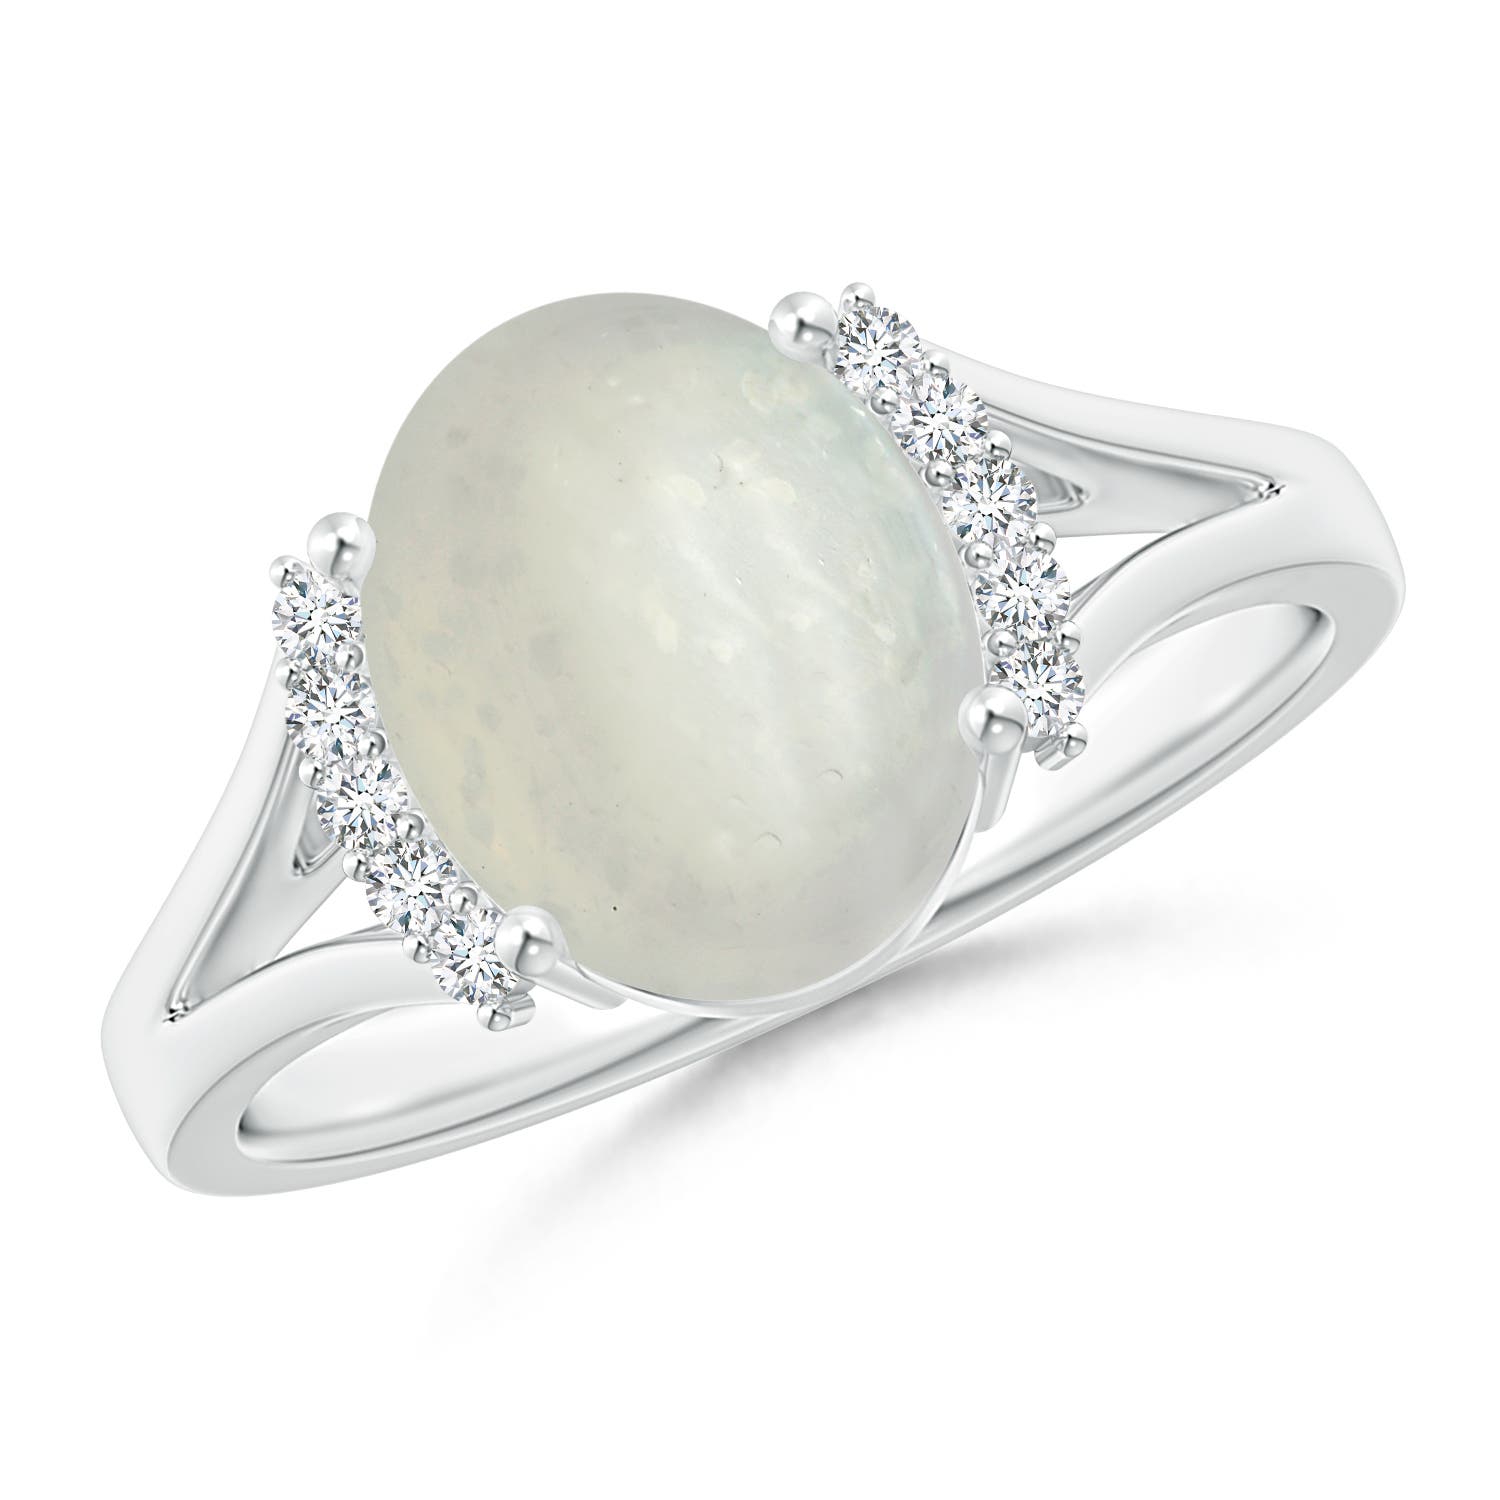 A - Moonstone / 2.6 CT / 14 KT White Gold